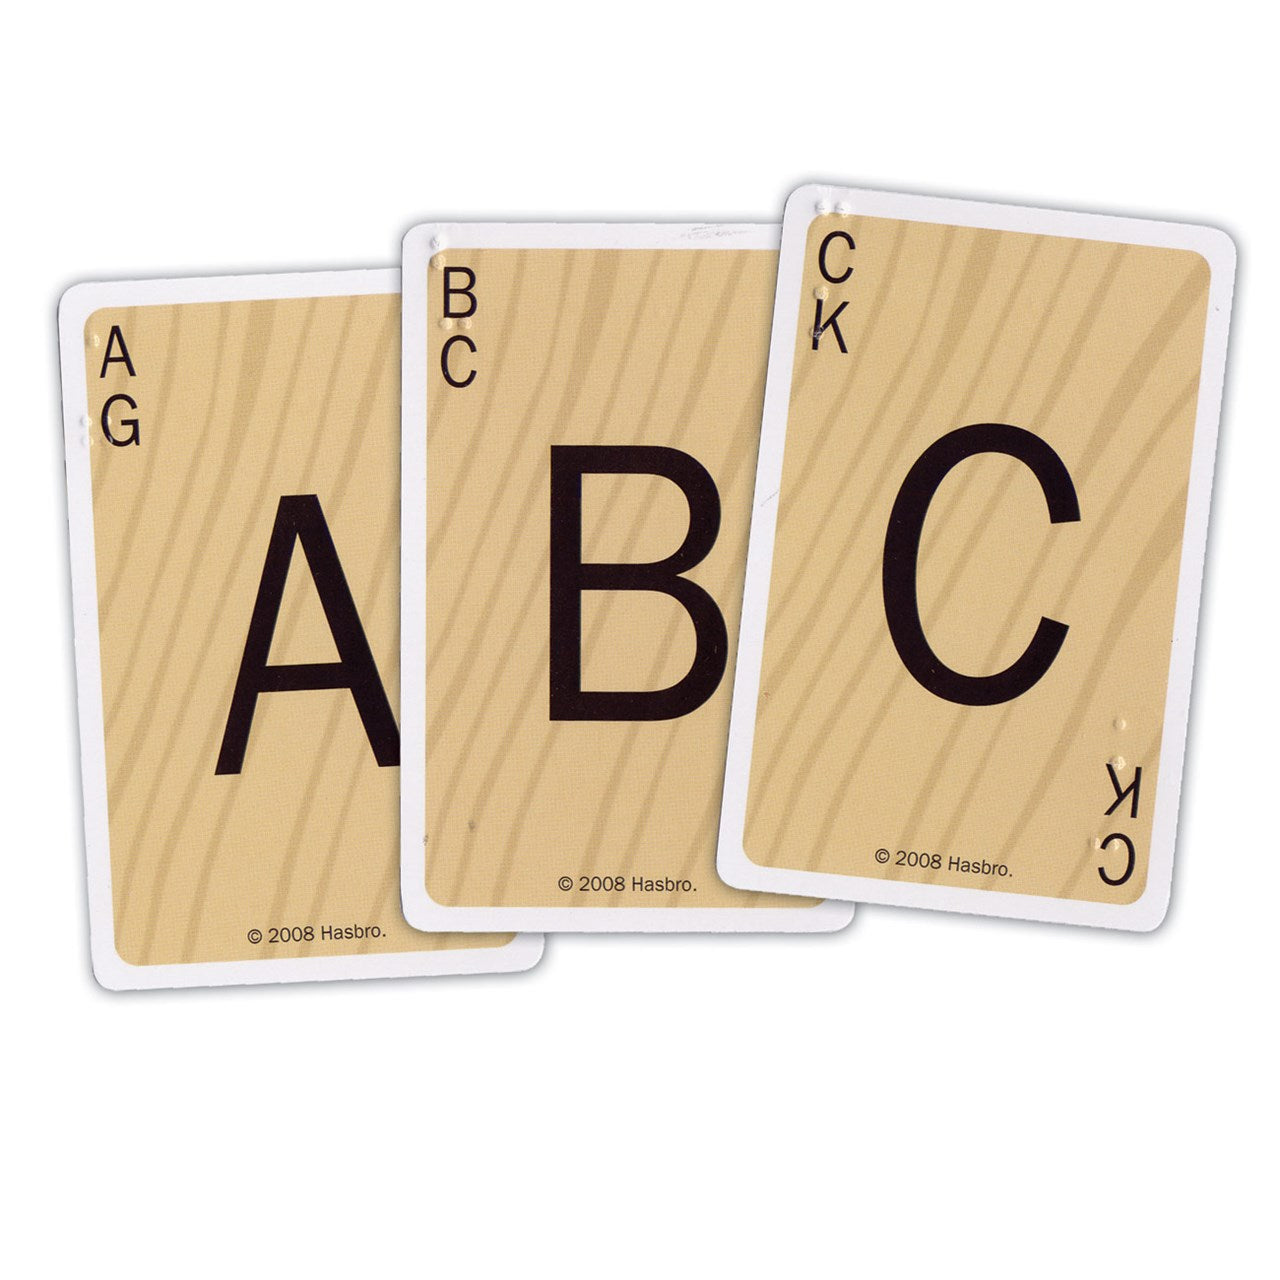 3 Scrabble cards with the letters A, B, and C on them